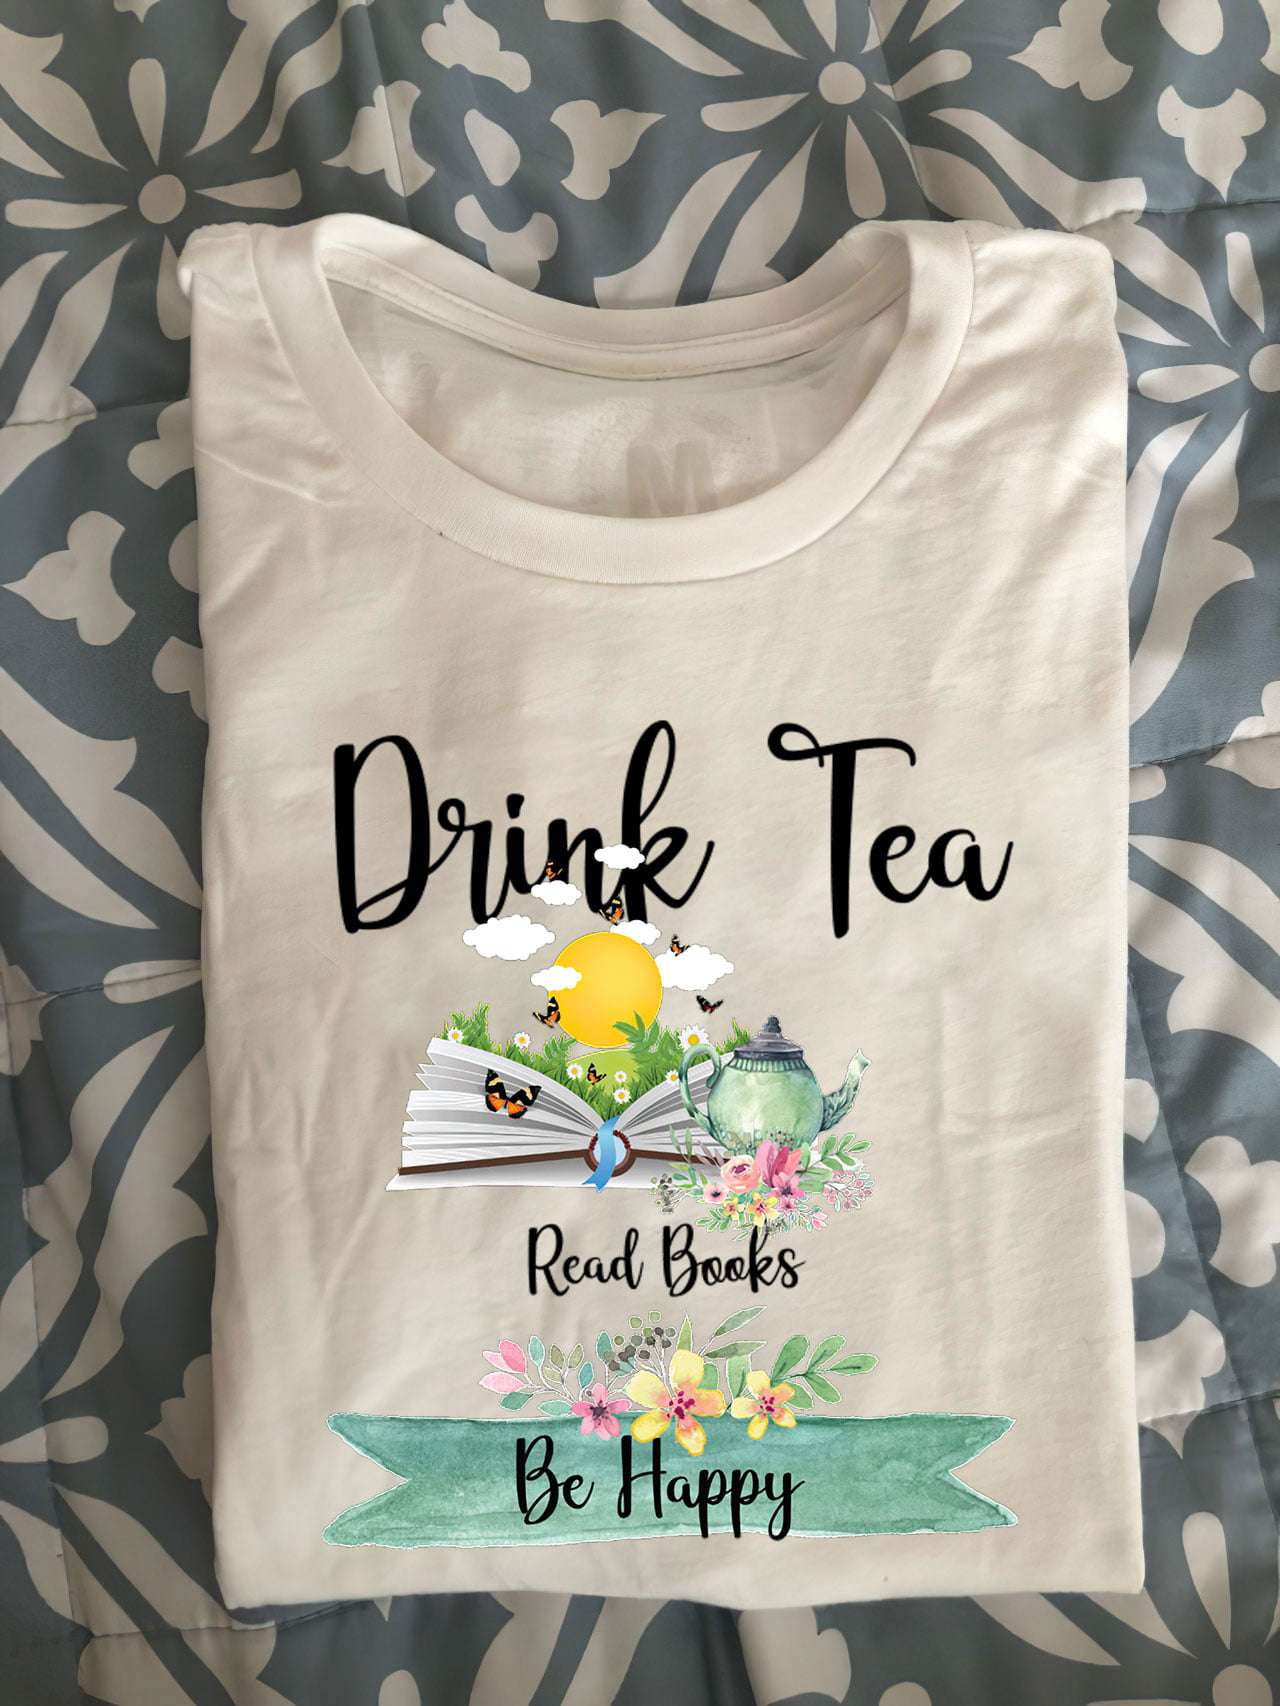 Drink tea, read books, be happy - Happy with tea and books